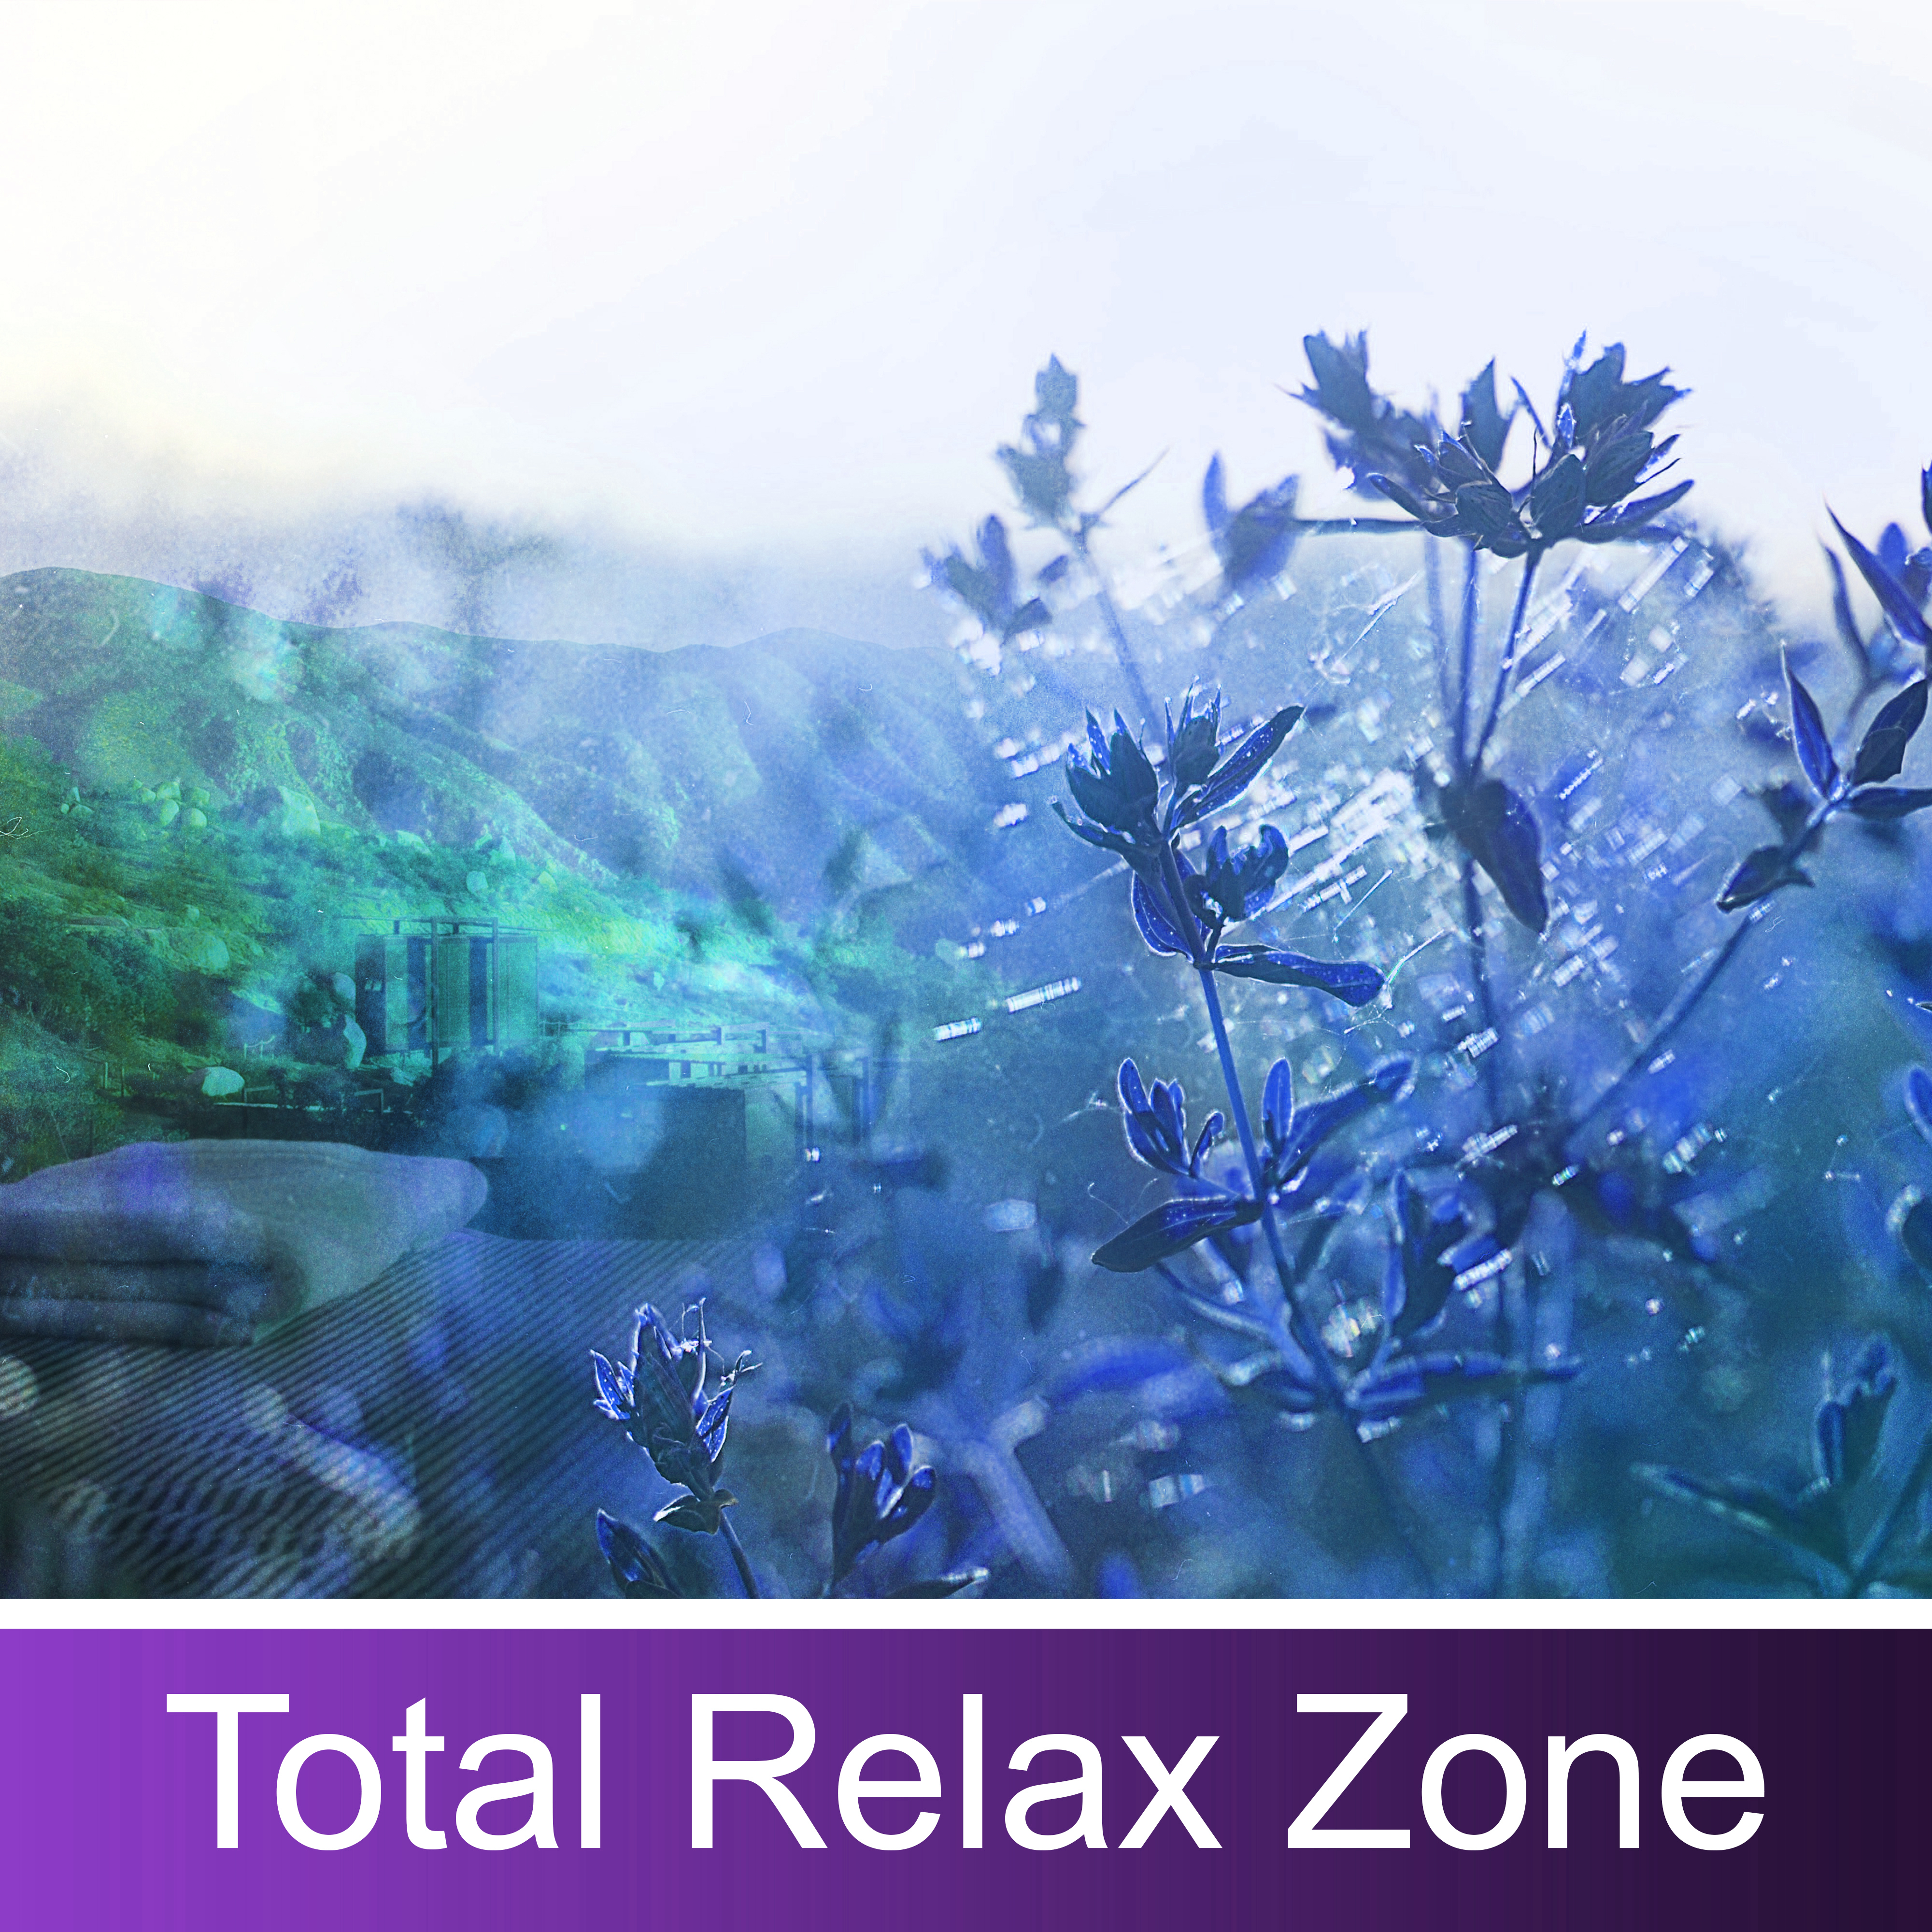 Total Relax Zone  Relaxing Music, Sounds of Nature, Rest, Stress Relief, Reduce Anxiety, Serenity New Age